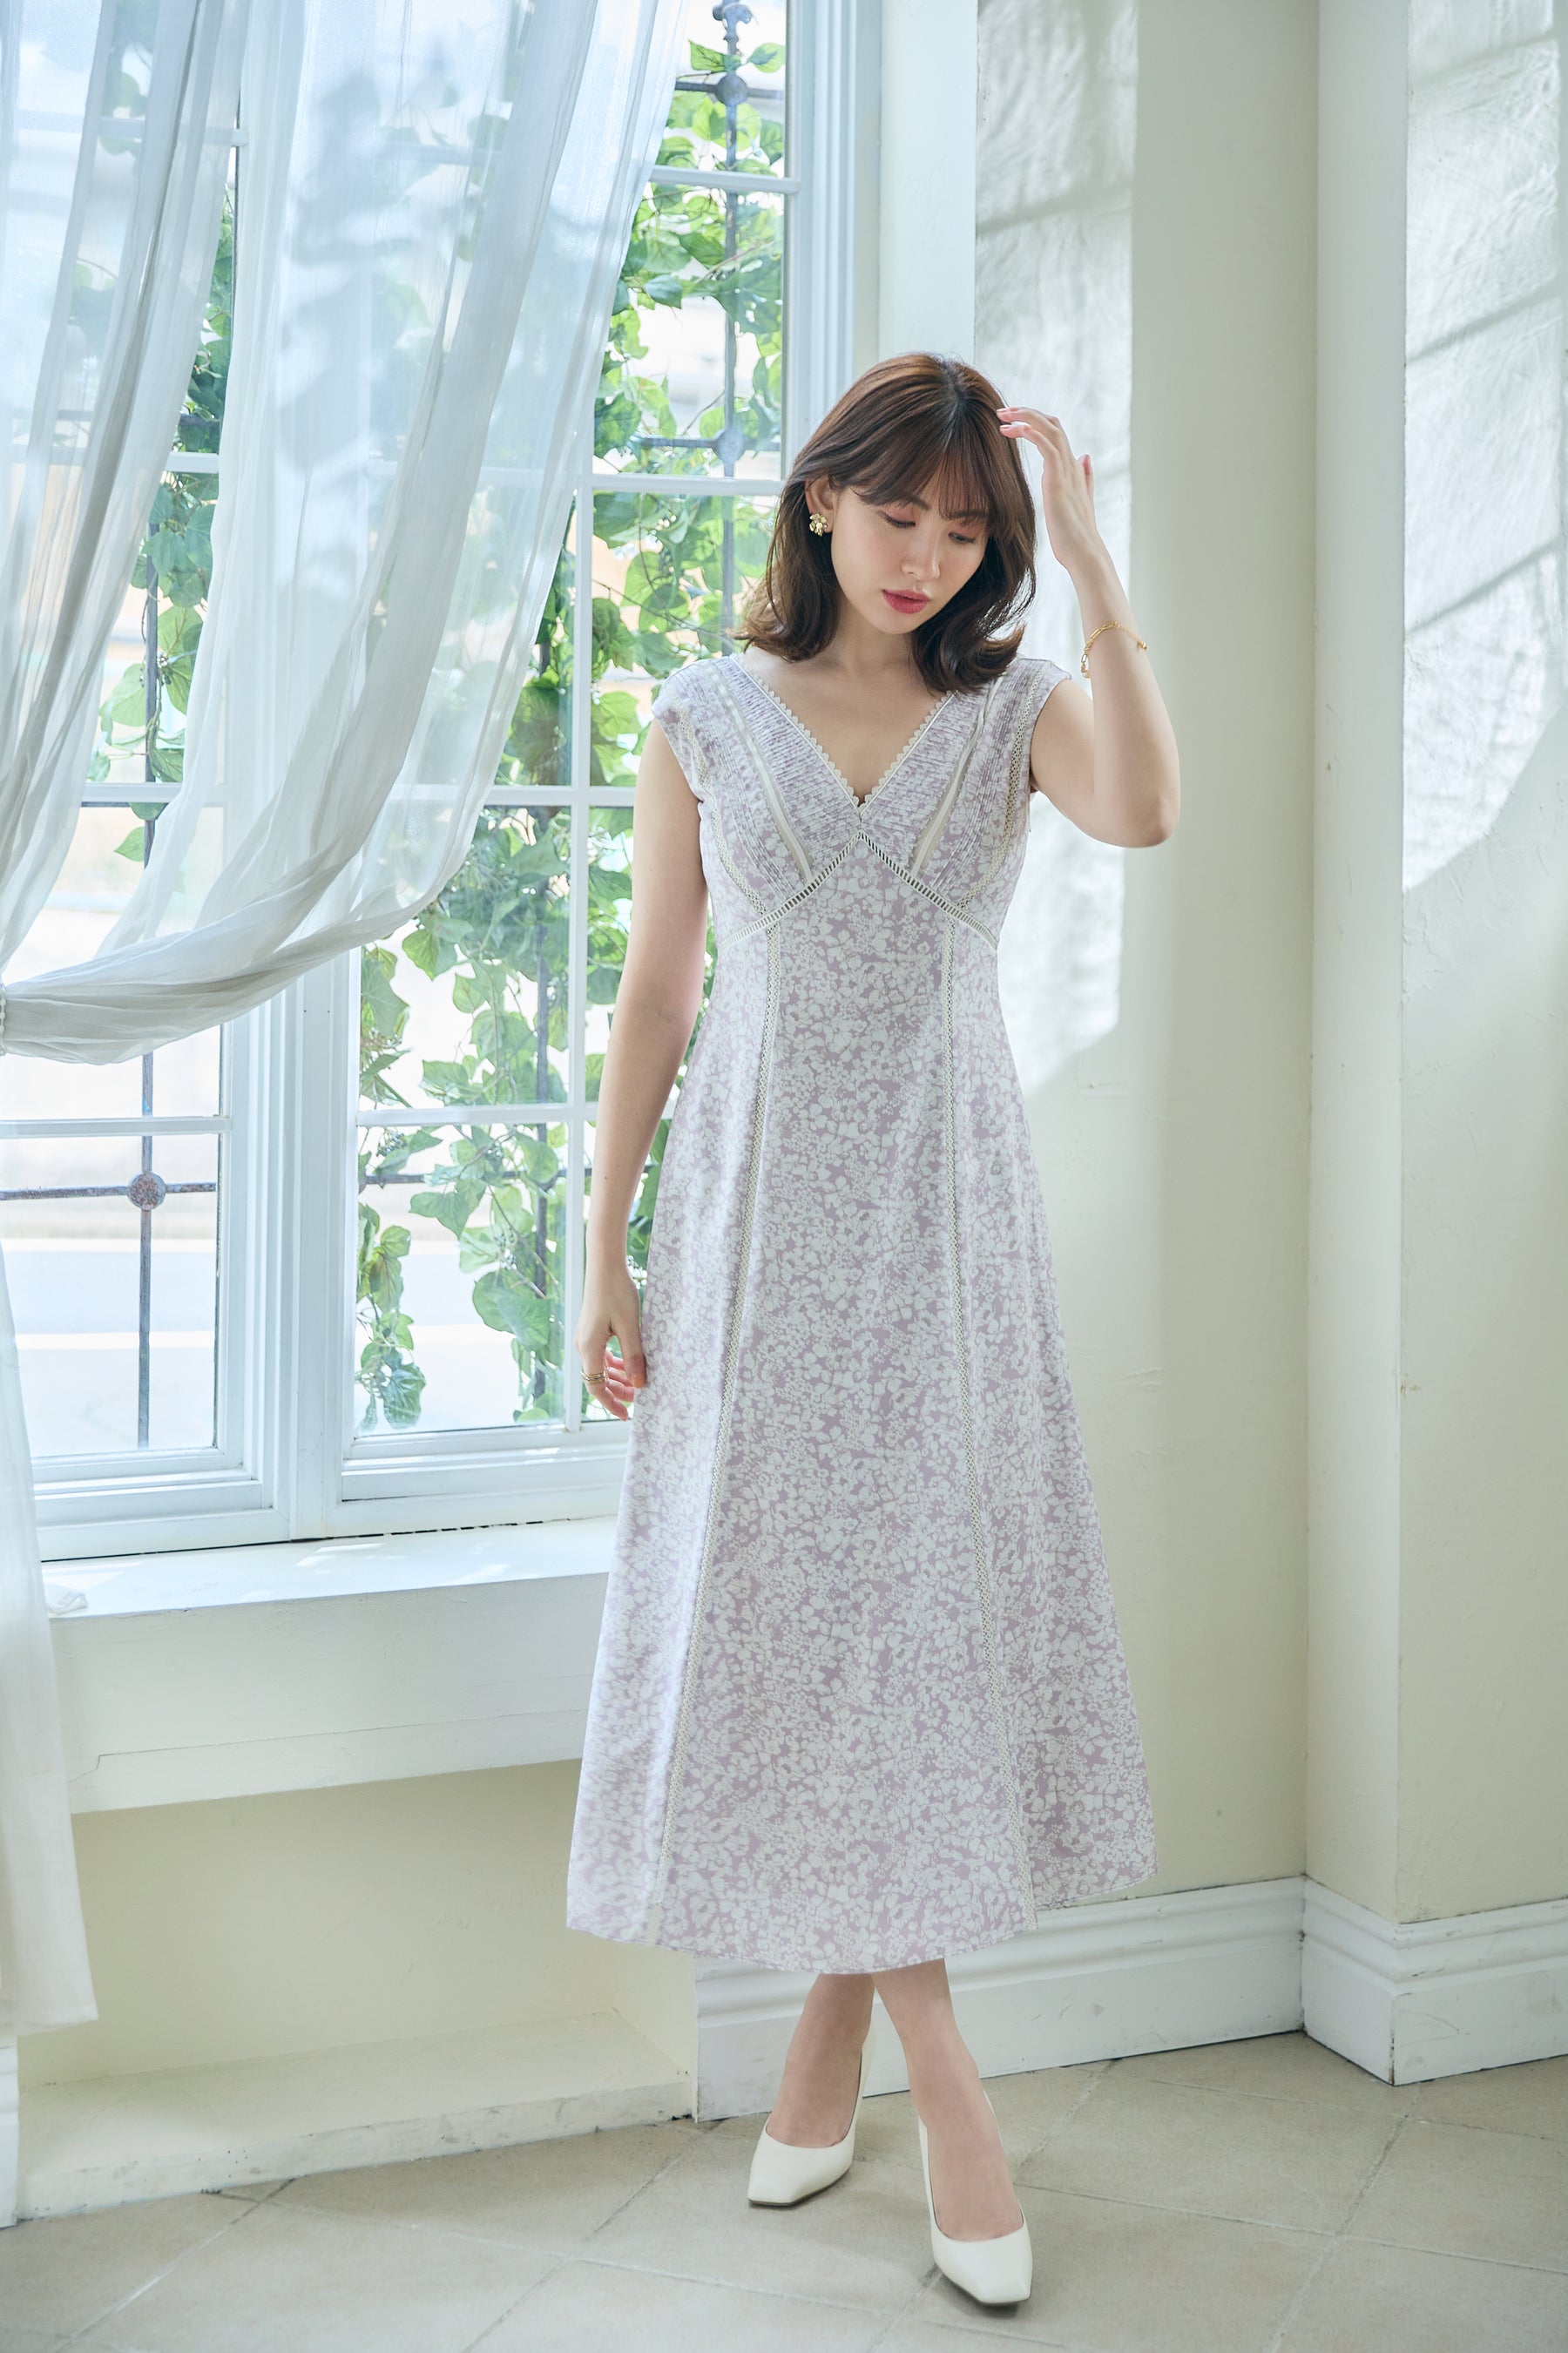 Herlipto Lace trimmed floral dress フローラルサイズ展開